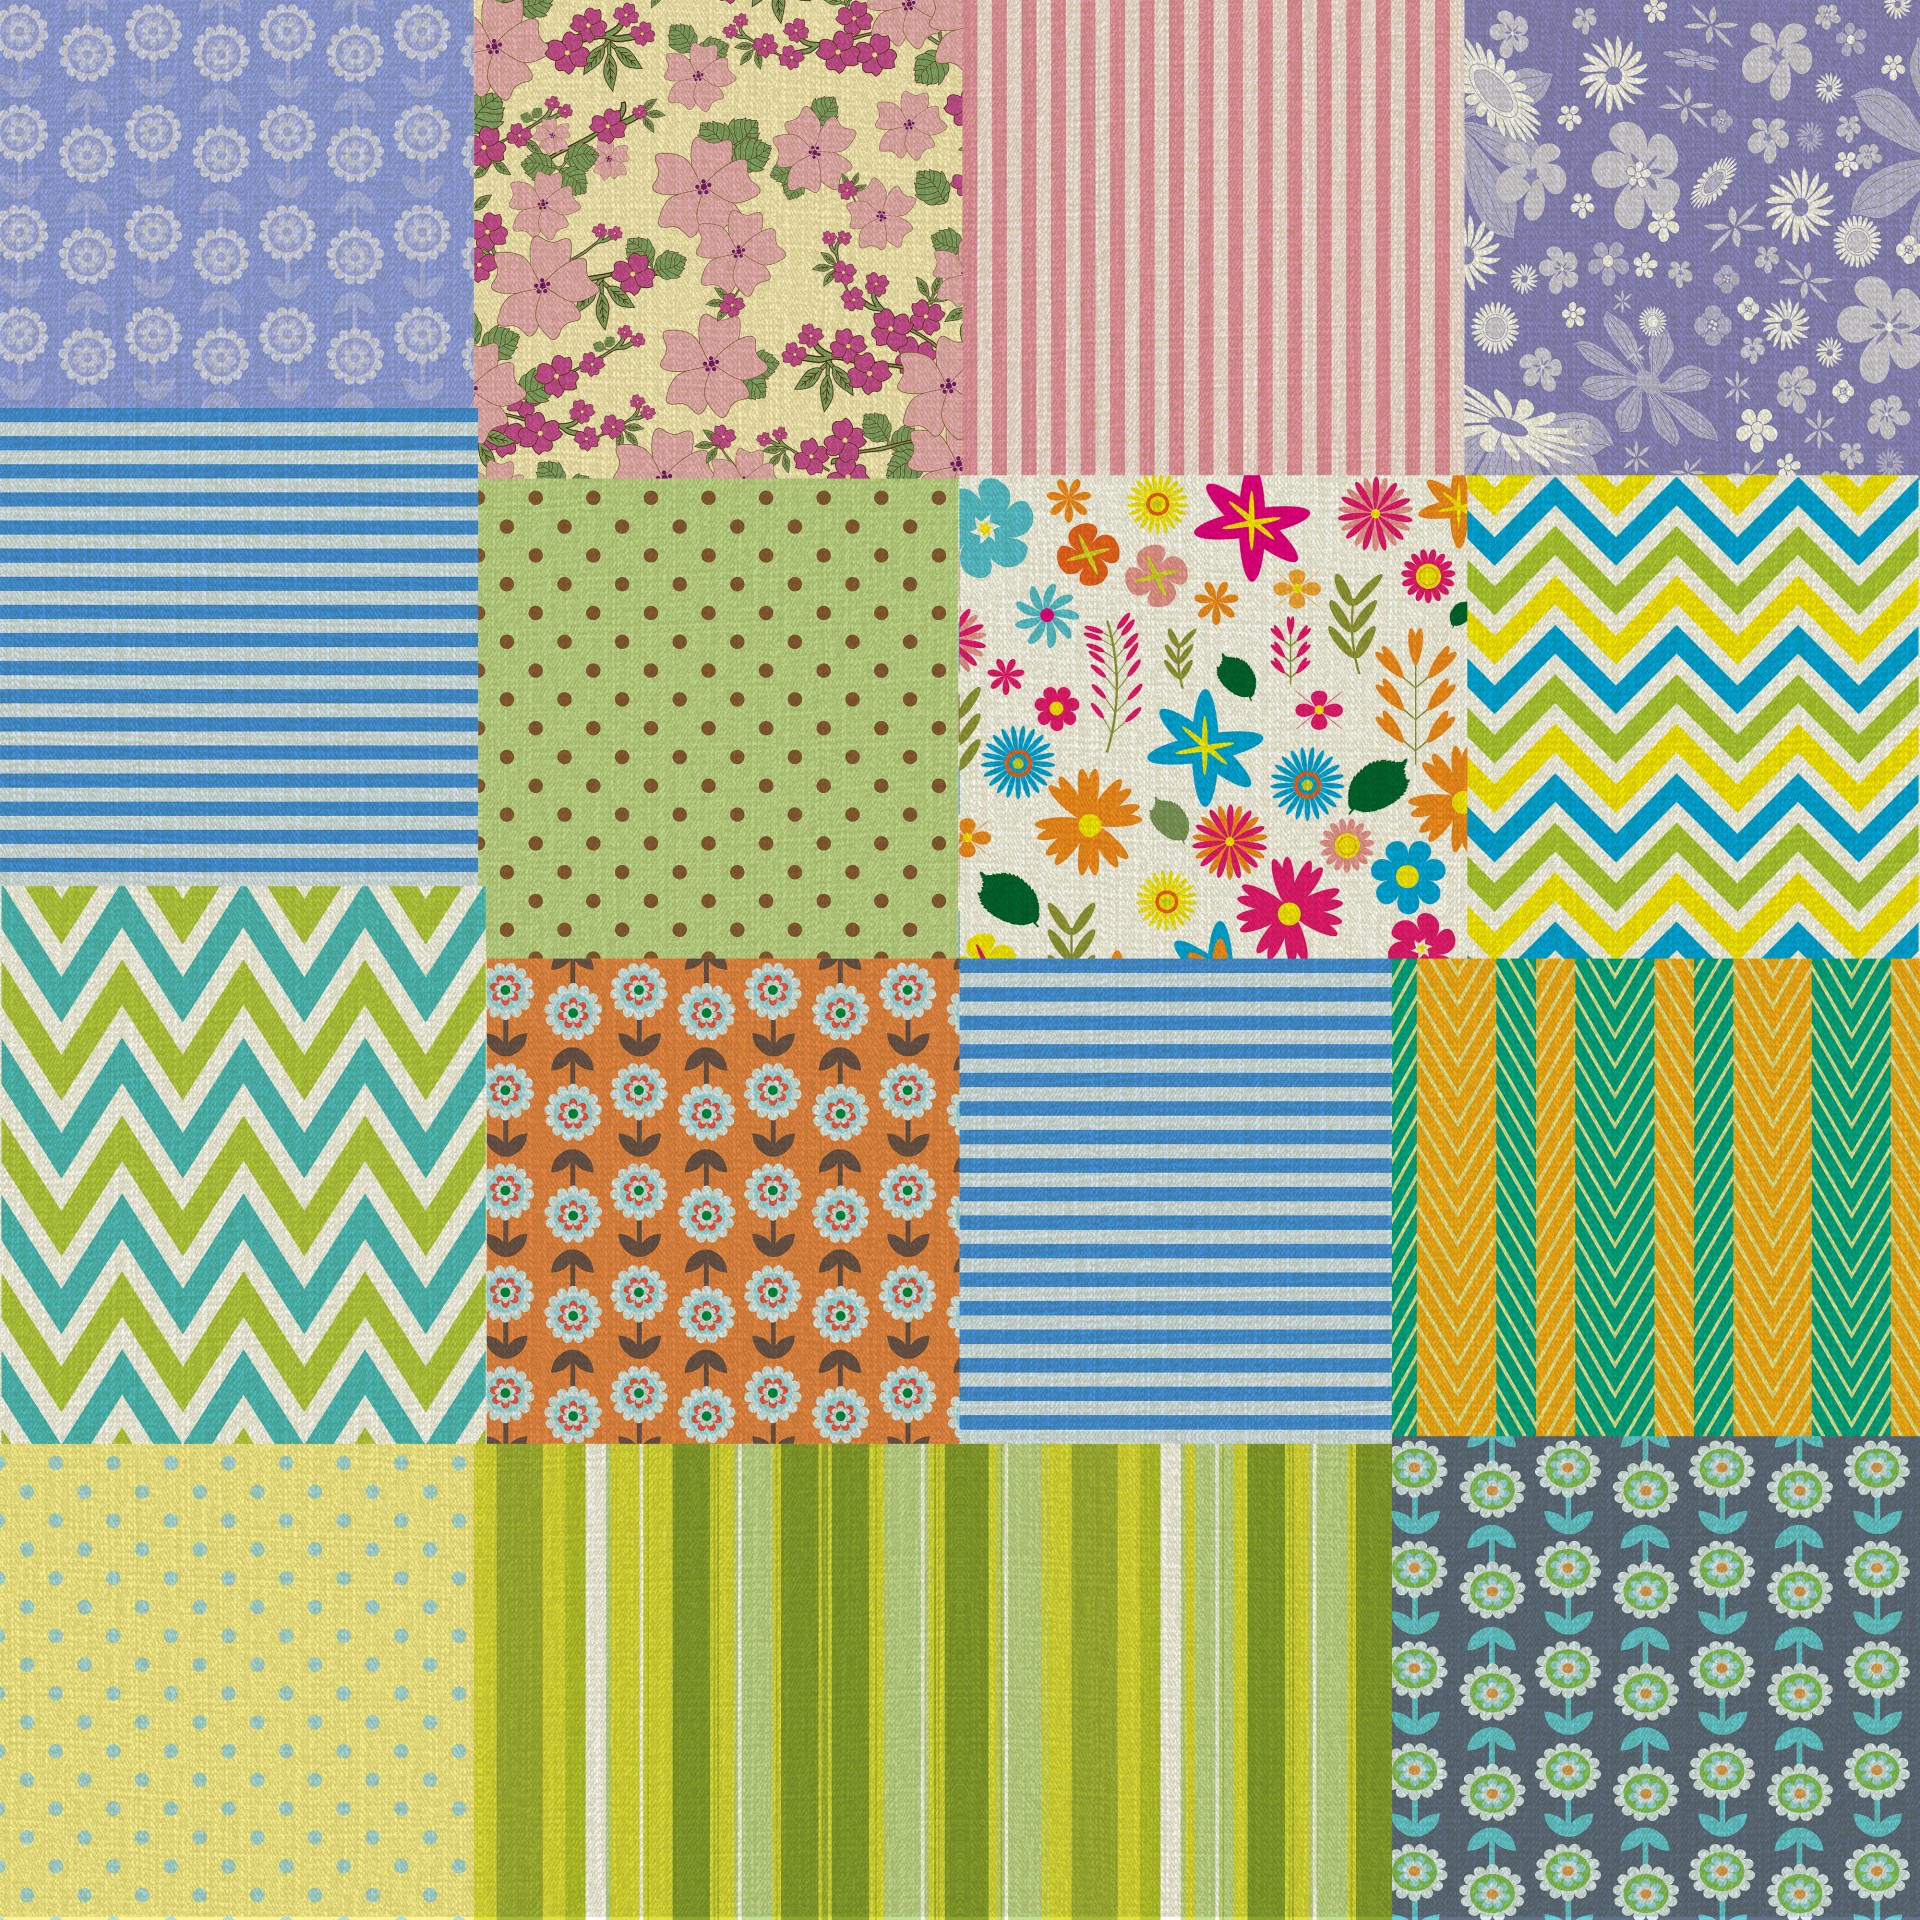 patchwork patchwork quilt fabric free photo